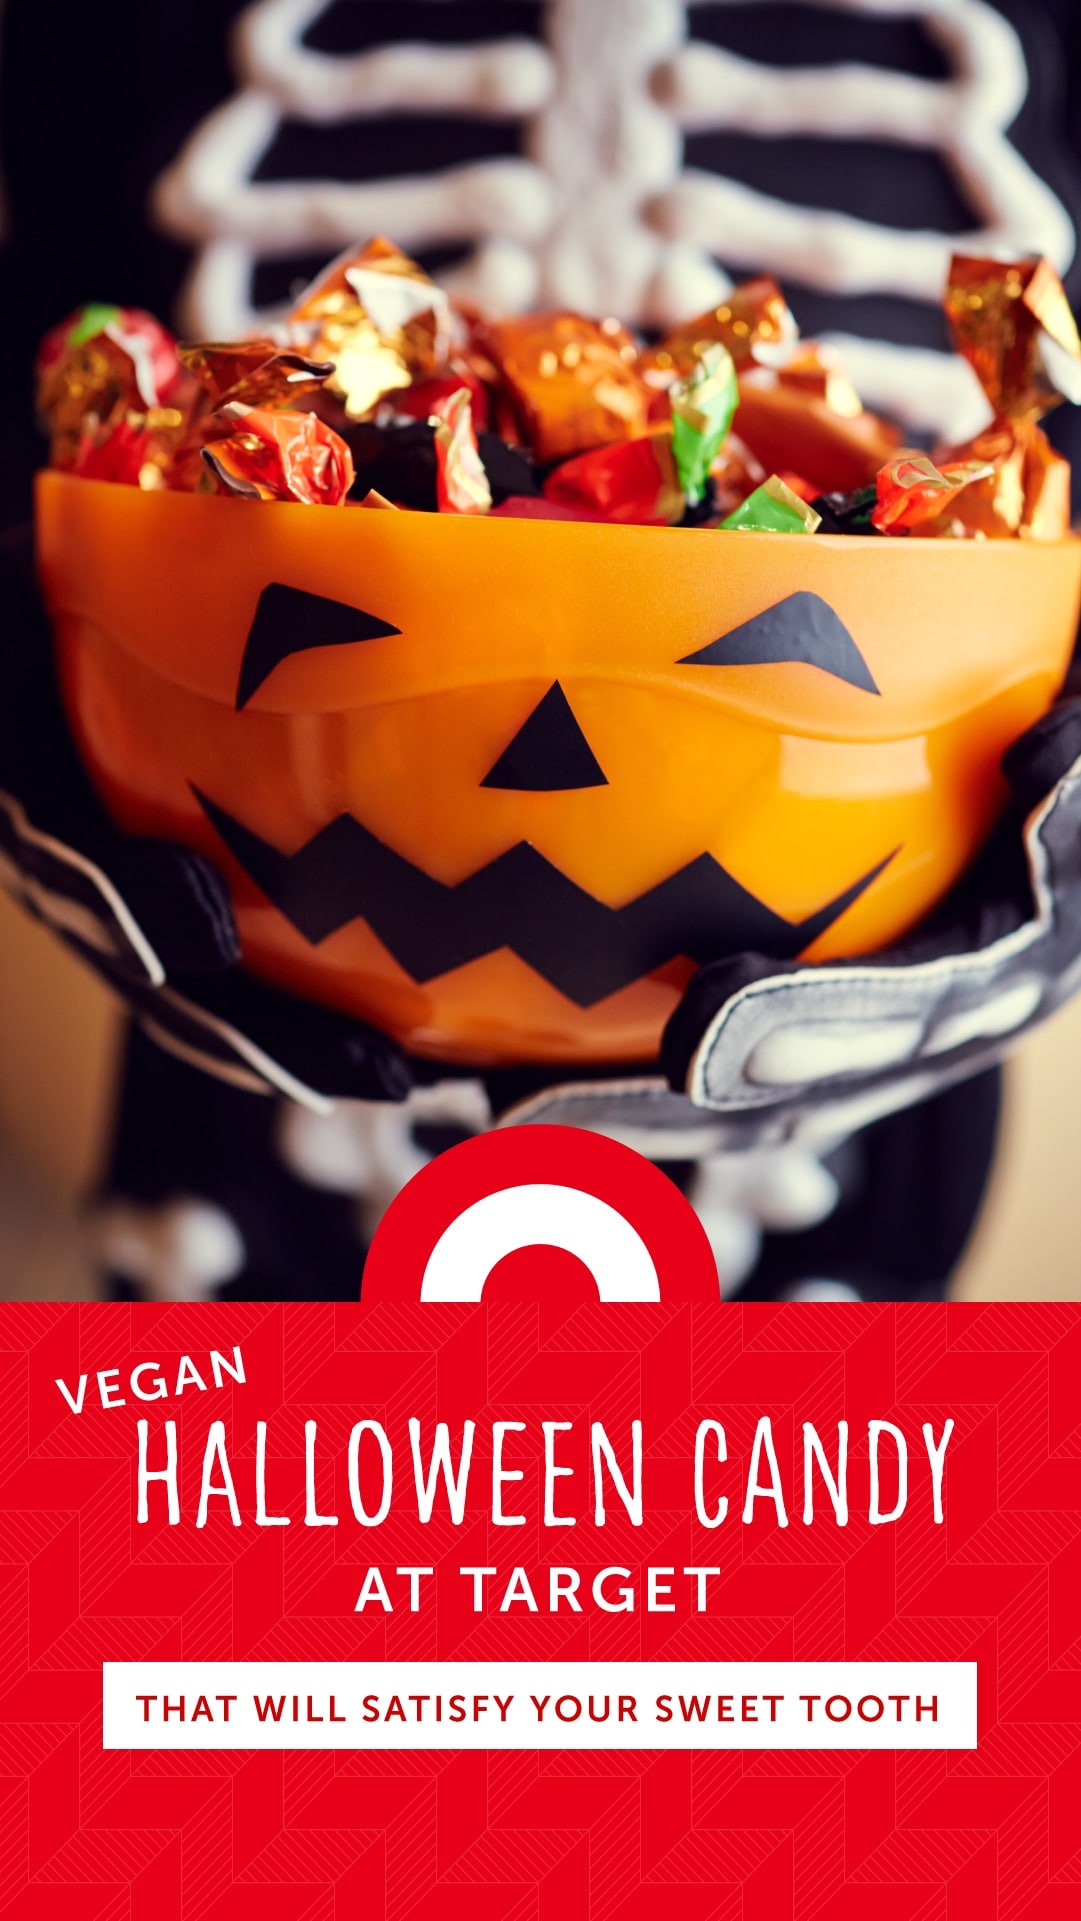 Vegan Halloween Candy at Target That Will Satisfy Your Sweet Tooth